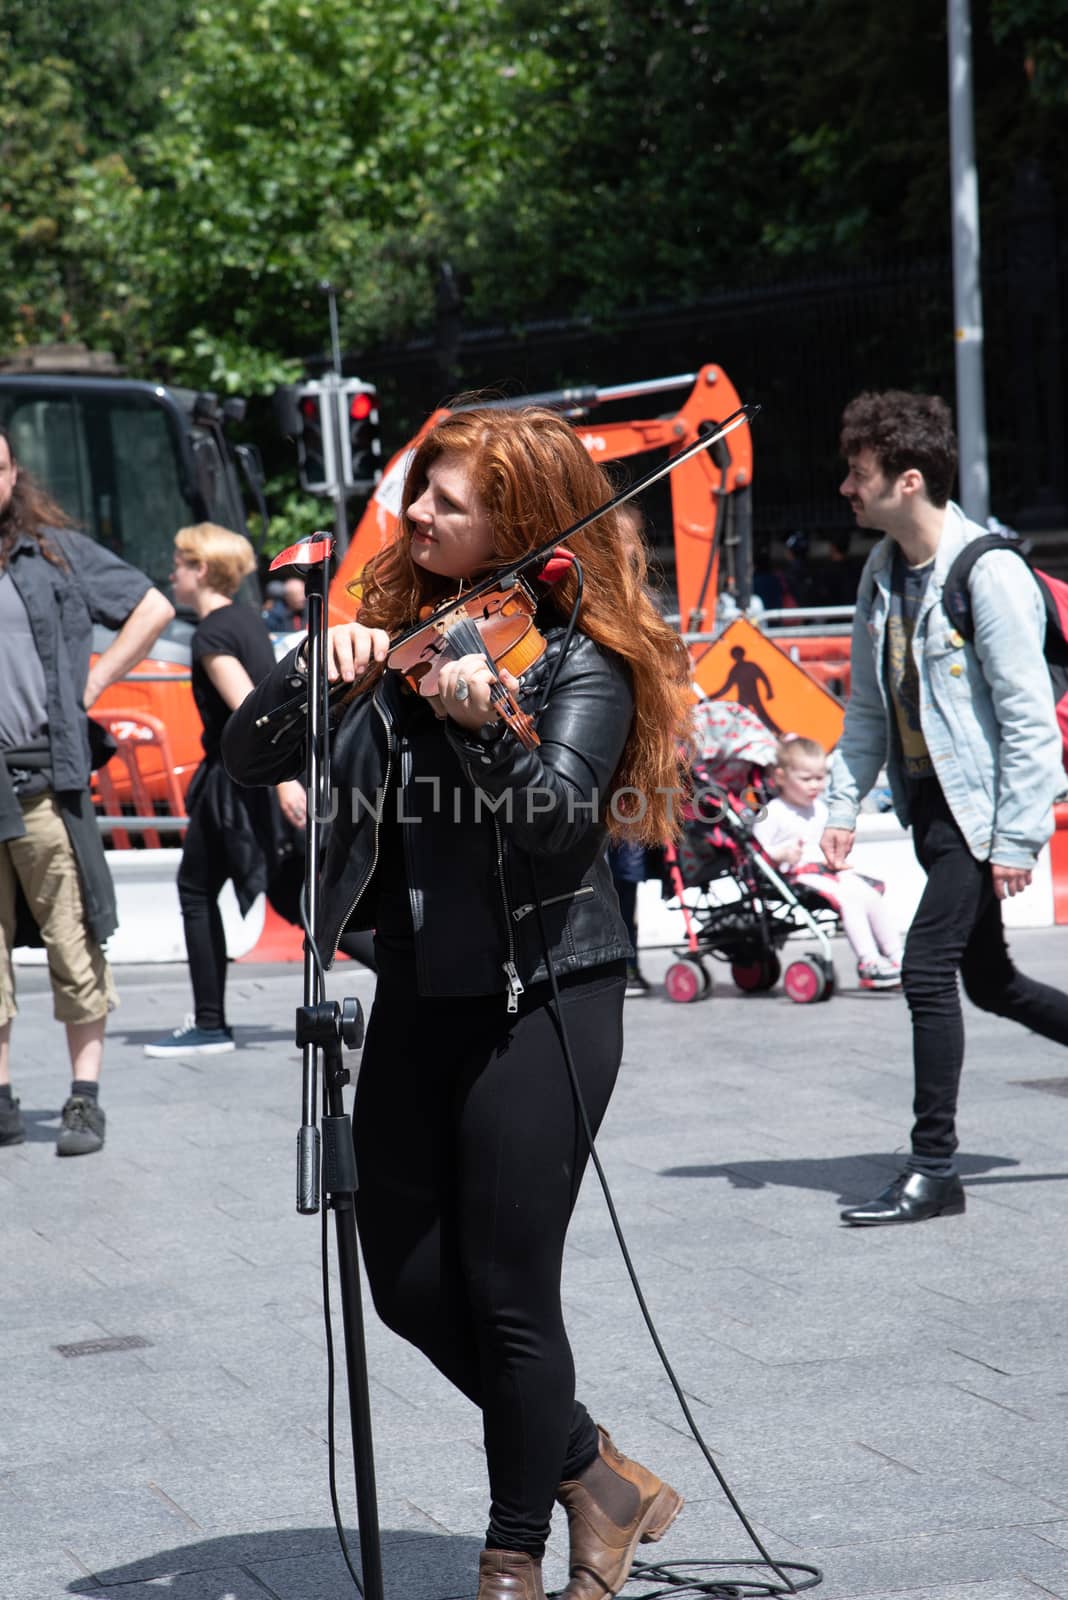 Dublin, Ireland--July 16, 2018. A musician playing the violin on the street with pedestrians in the background.